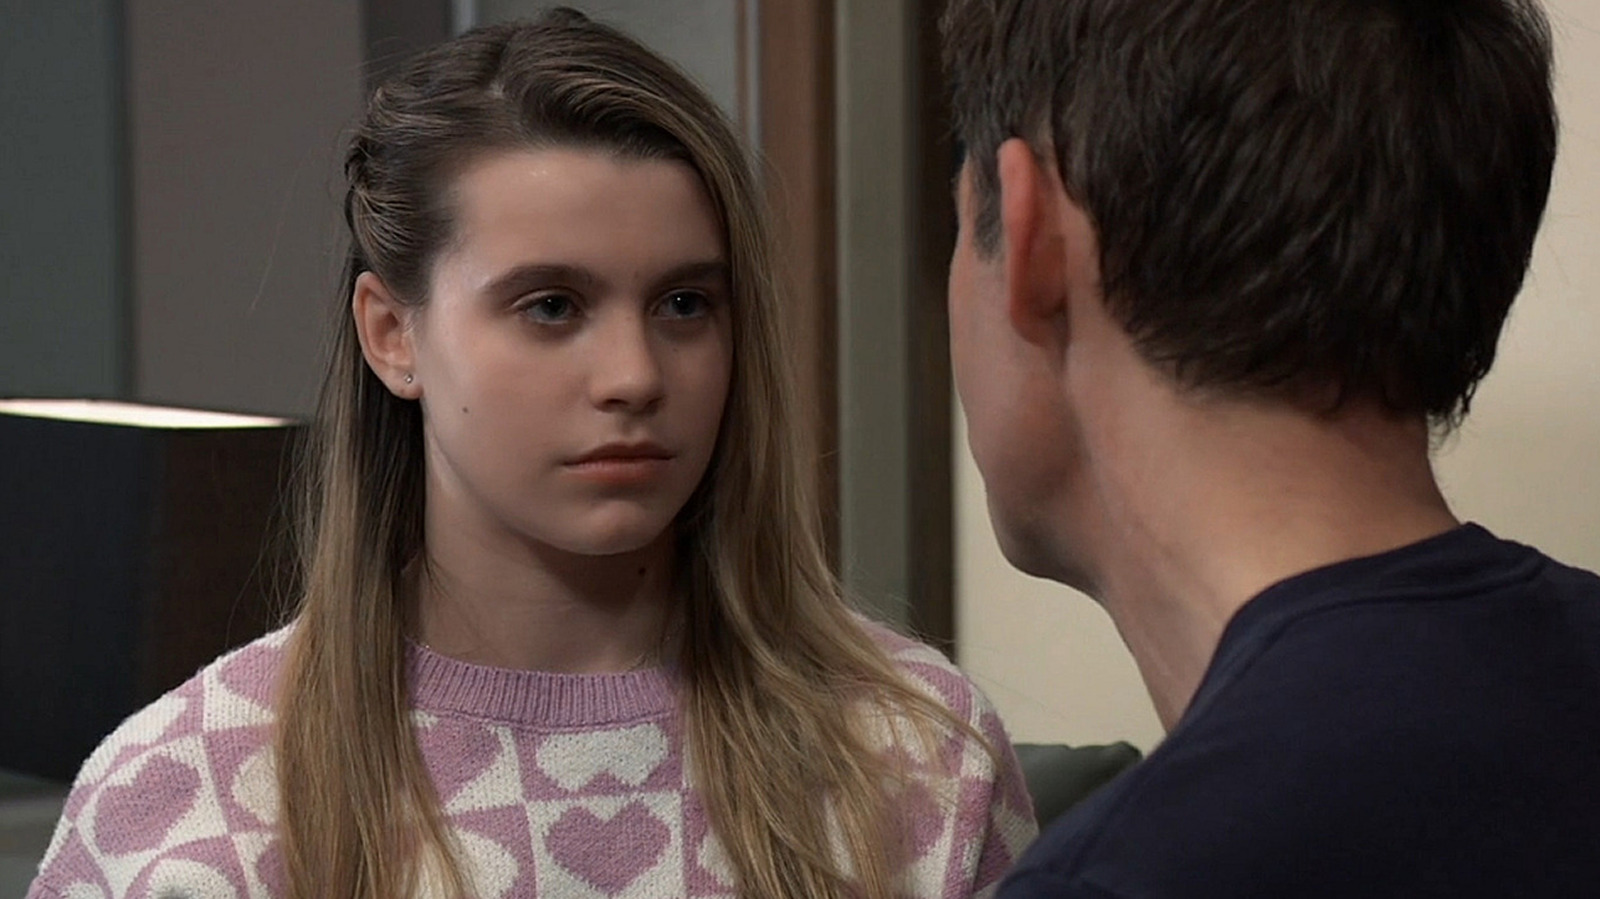 Meet The Latest Young Actress To Play General Hospital's Charlotte